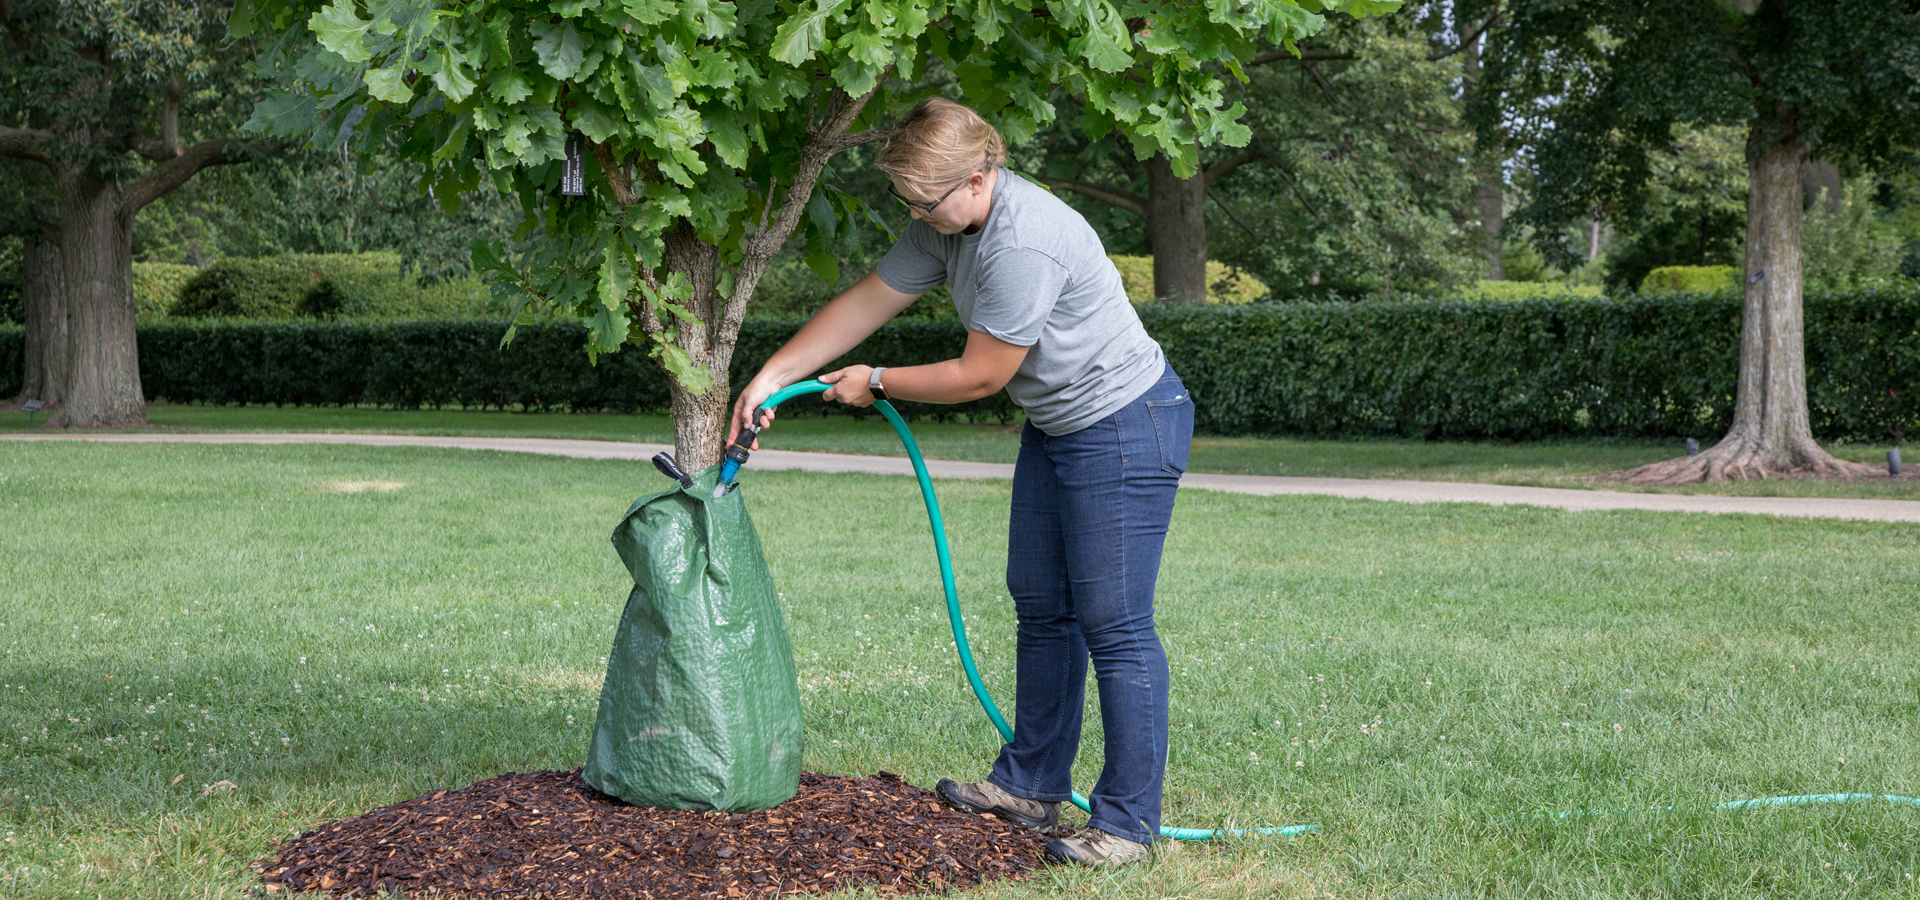 Watering a tree with a gator bag